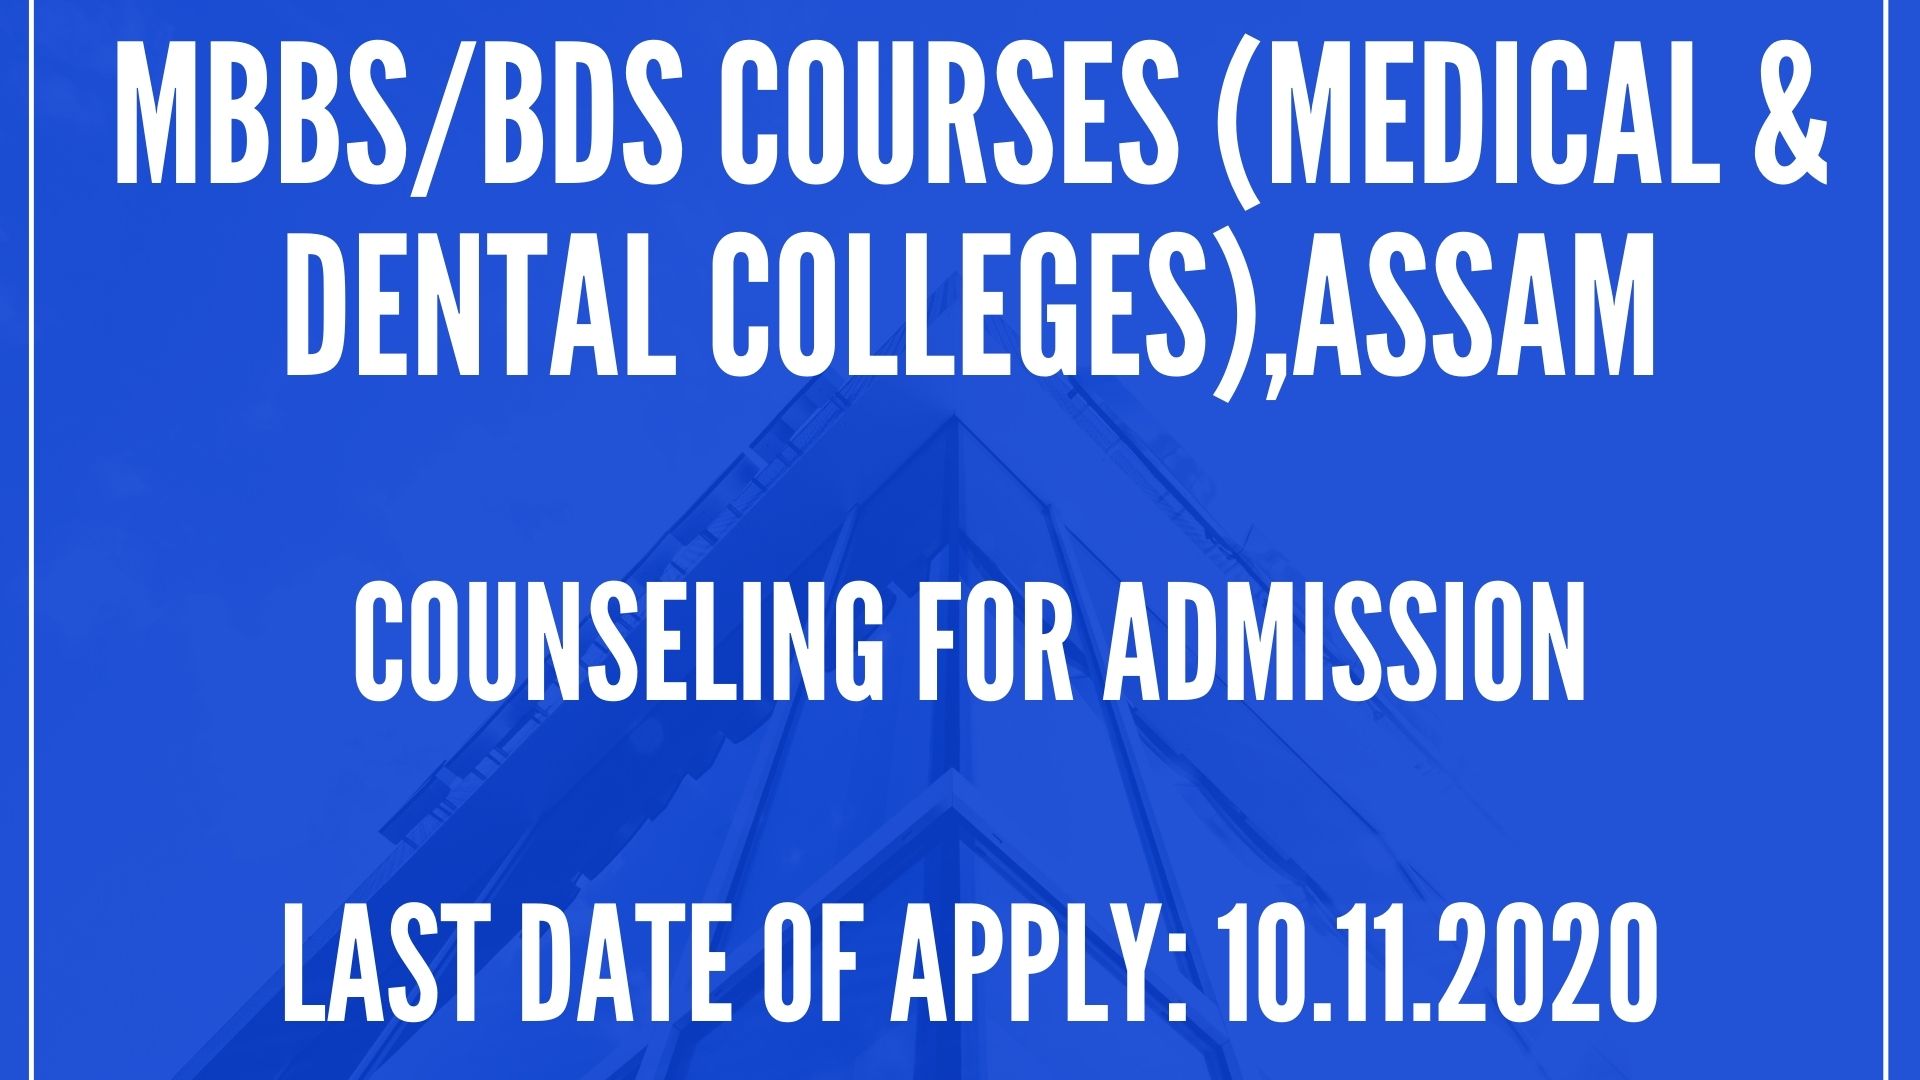 MBBS/BDS COURSES (MEDICAL & DENTAL COLLEGES),ASSAM COUNSELING FOR ADMISSION